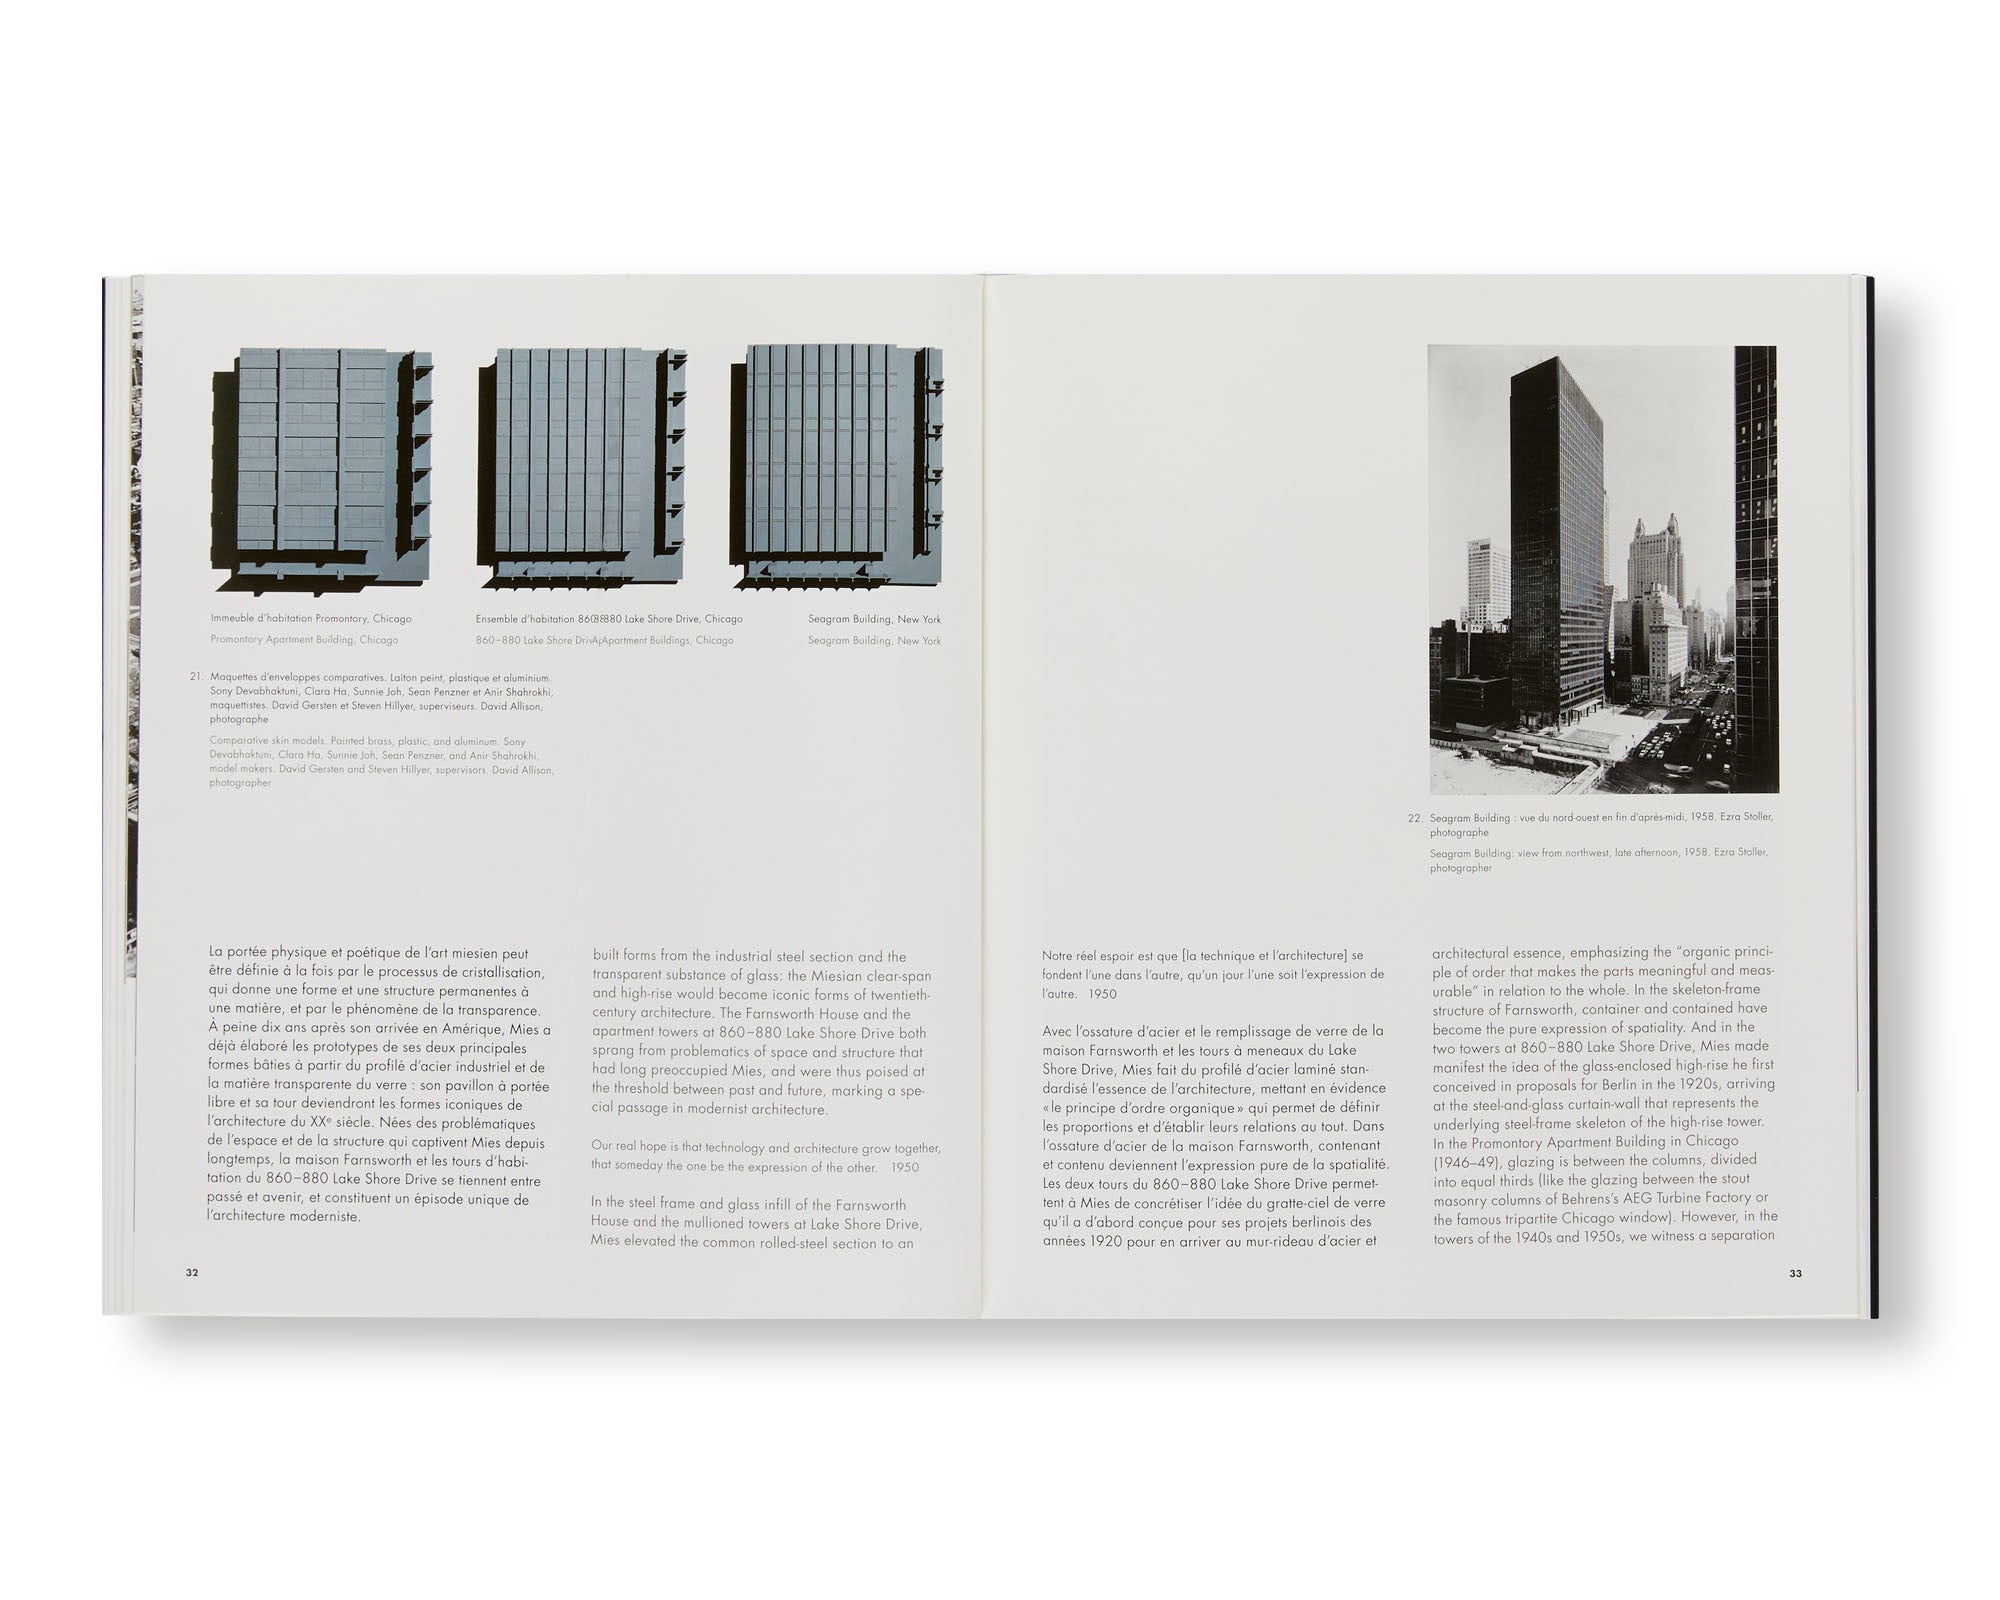 MIES VAN DER ROHE: THE DIFFICULT ART OF THE SIMPLE by Mies van der Rohe